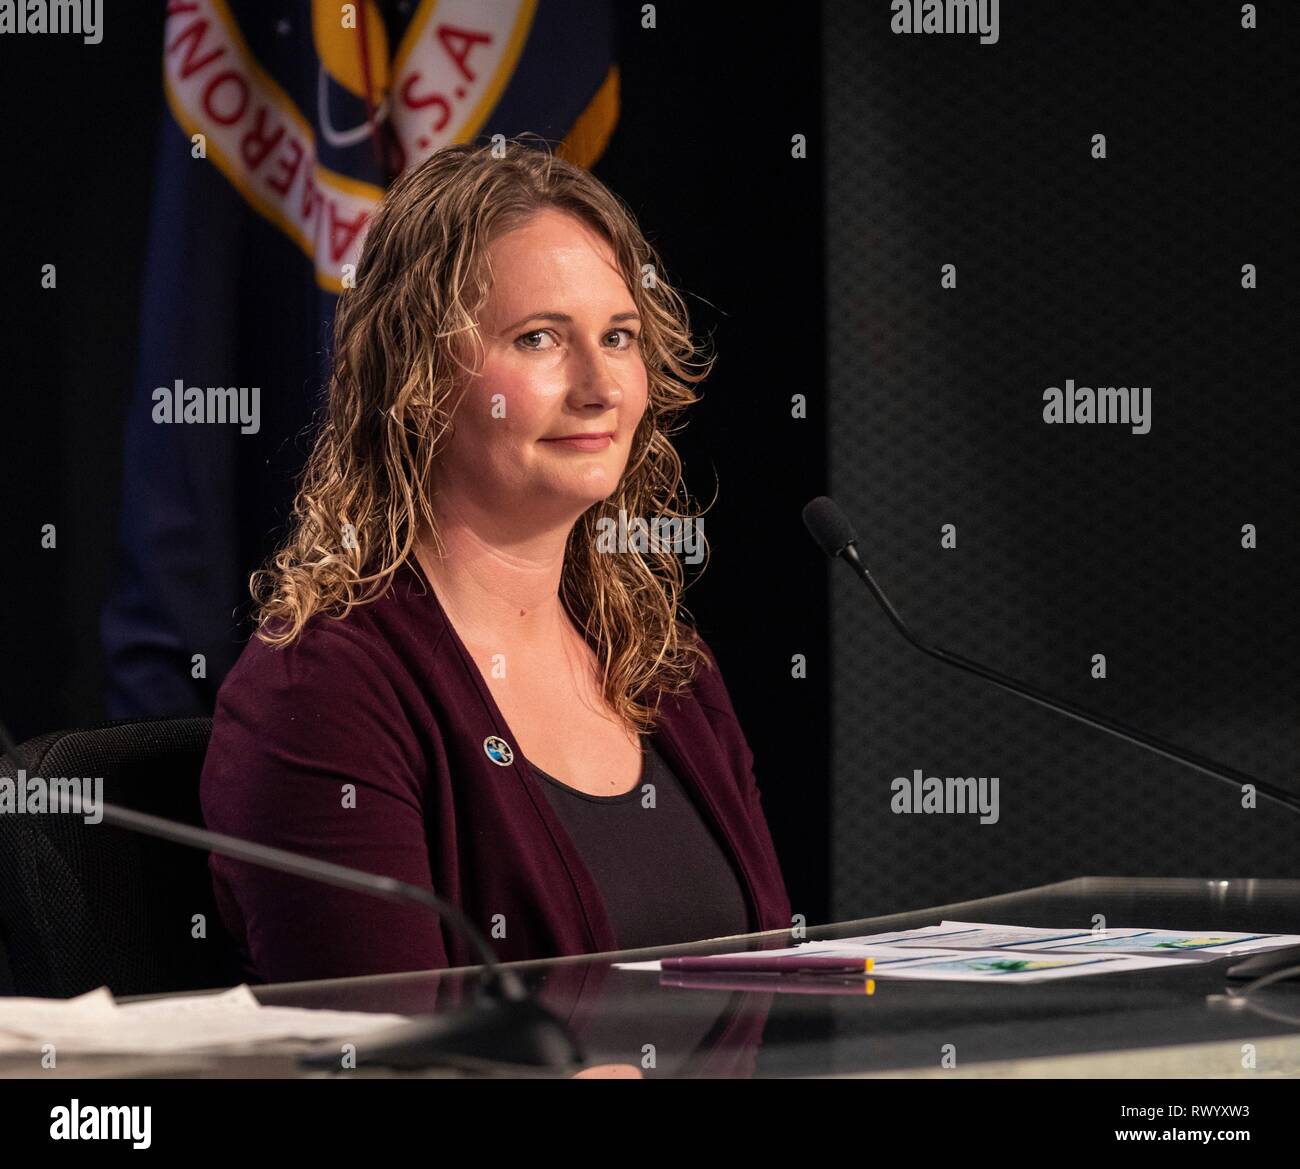 Melody C. Lovin, launch weather officer, 45th Weather Squadron, speaks to members of the media during a prelaunch news conference prior to the launch of the first commercial crew capsule Demo-1 at the Kennedy Space Center February 28, 2019 in Cape Canaveral, Florida. Stock Photo